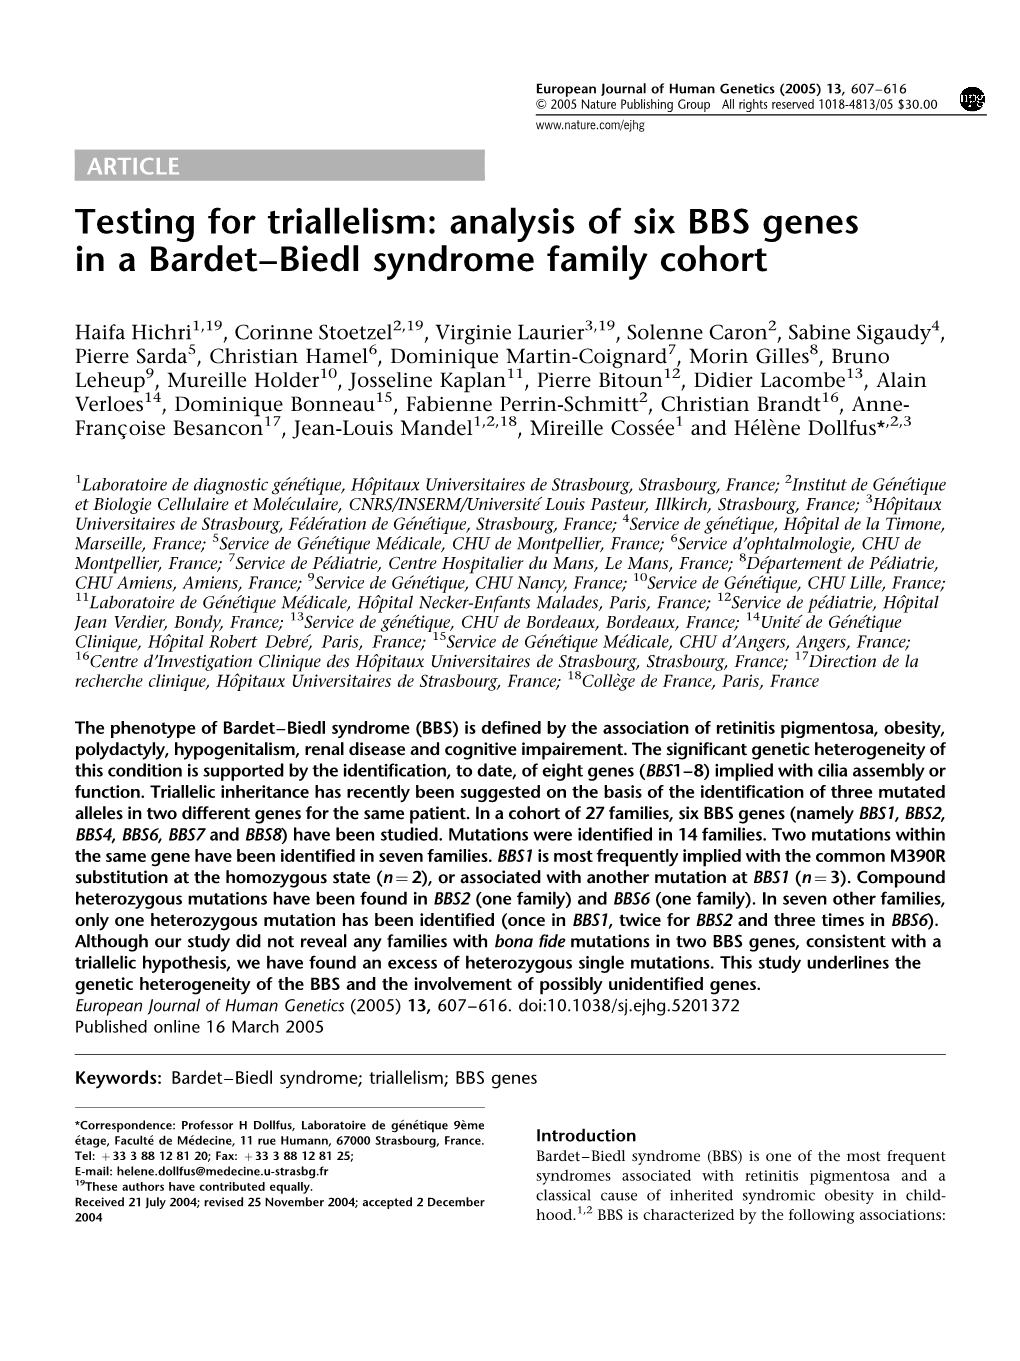 Analysis of Six BBS Genes in a Bardet–Biedl Syndrome Family Cohort